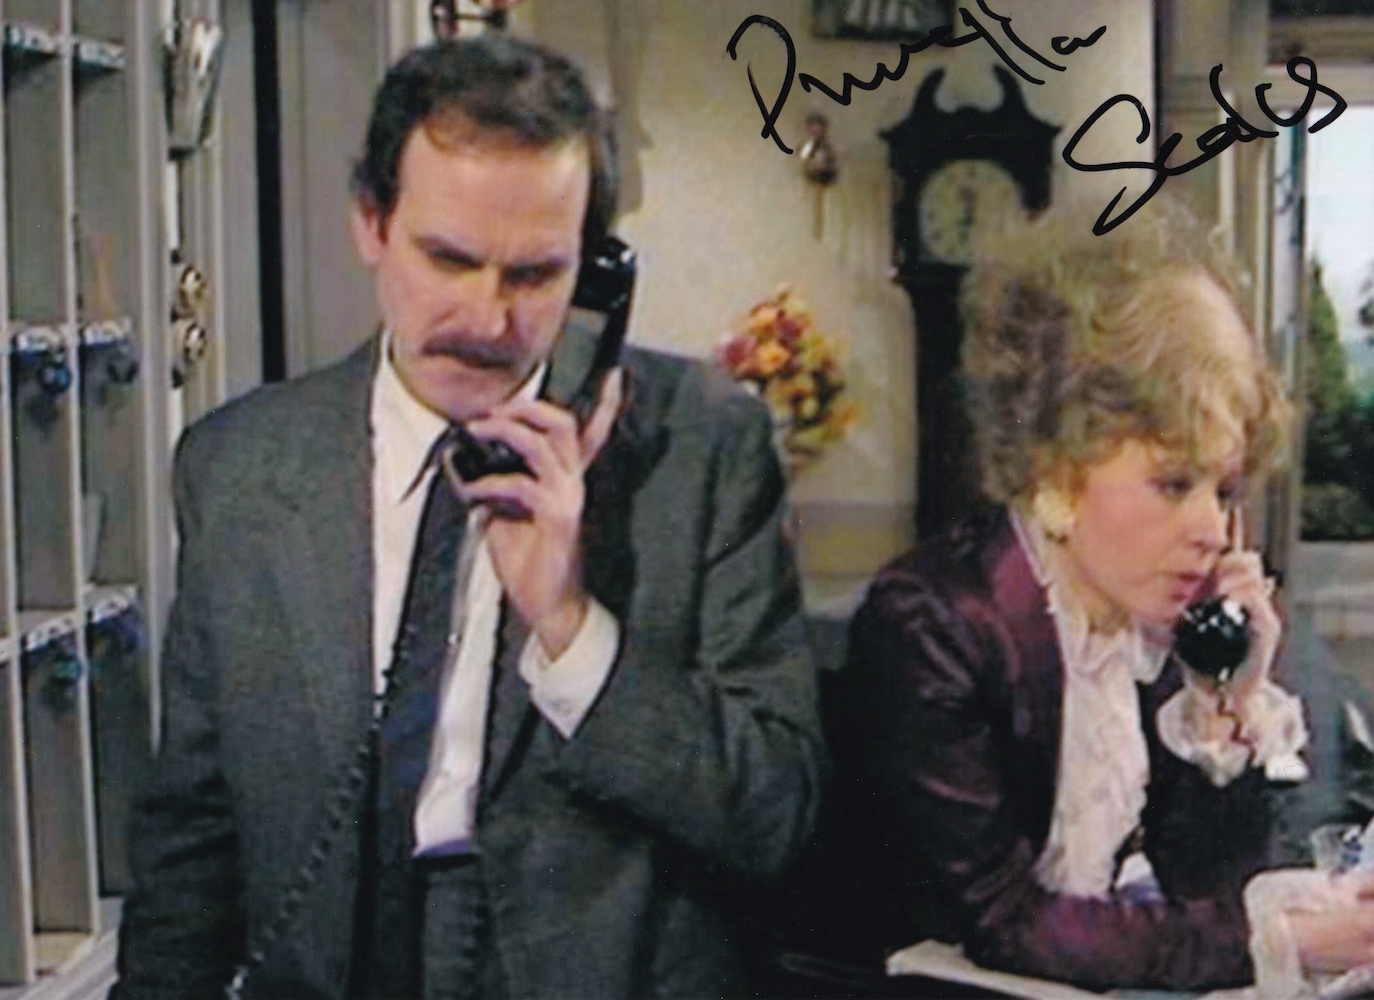 Prunella Scales Fawlty Towers Actress 7x5 inch Signed Photo. Good condition. All autographs come